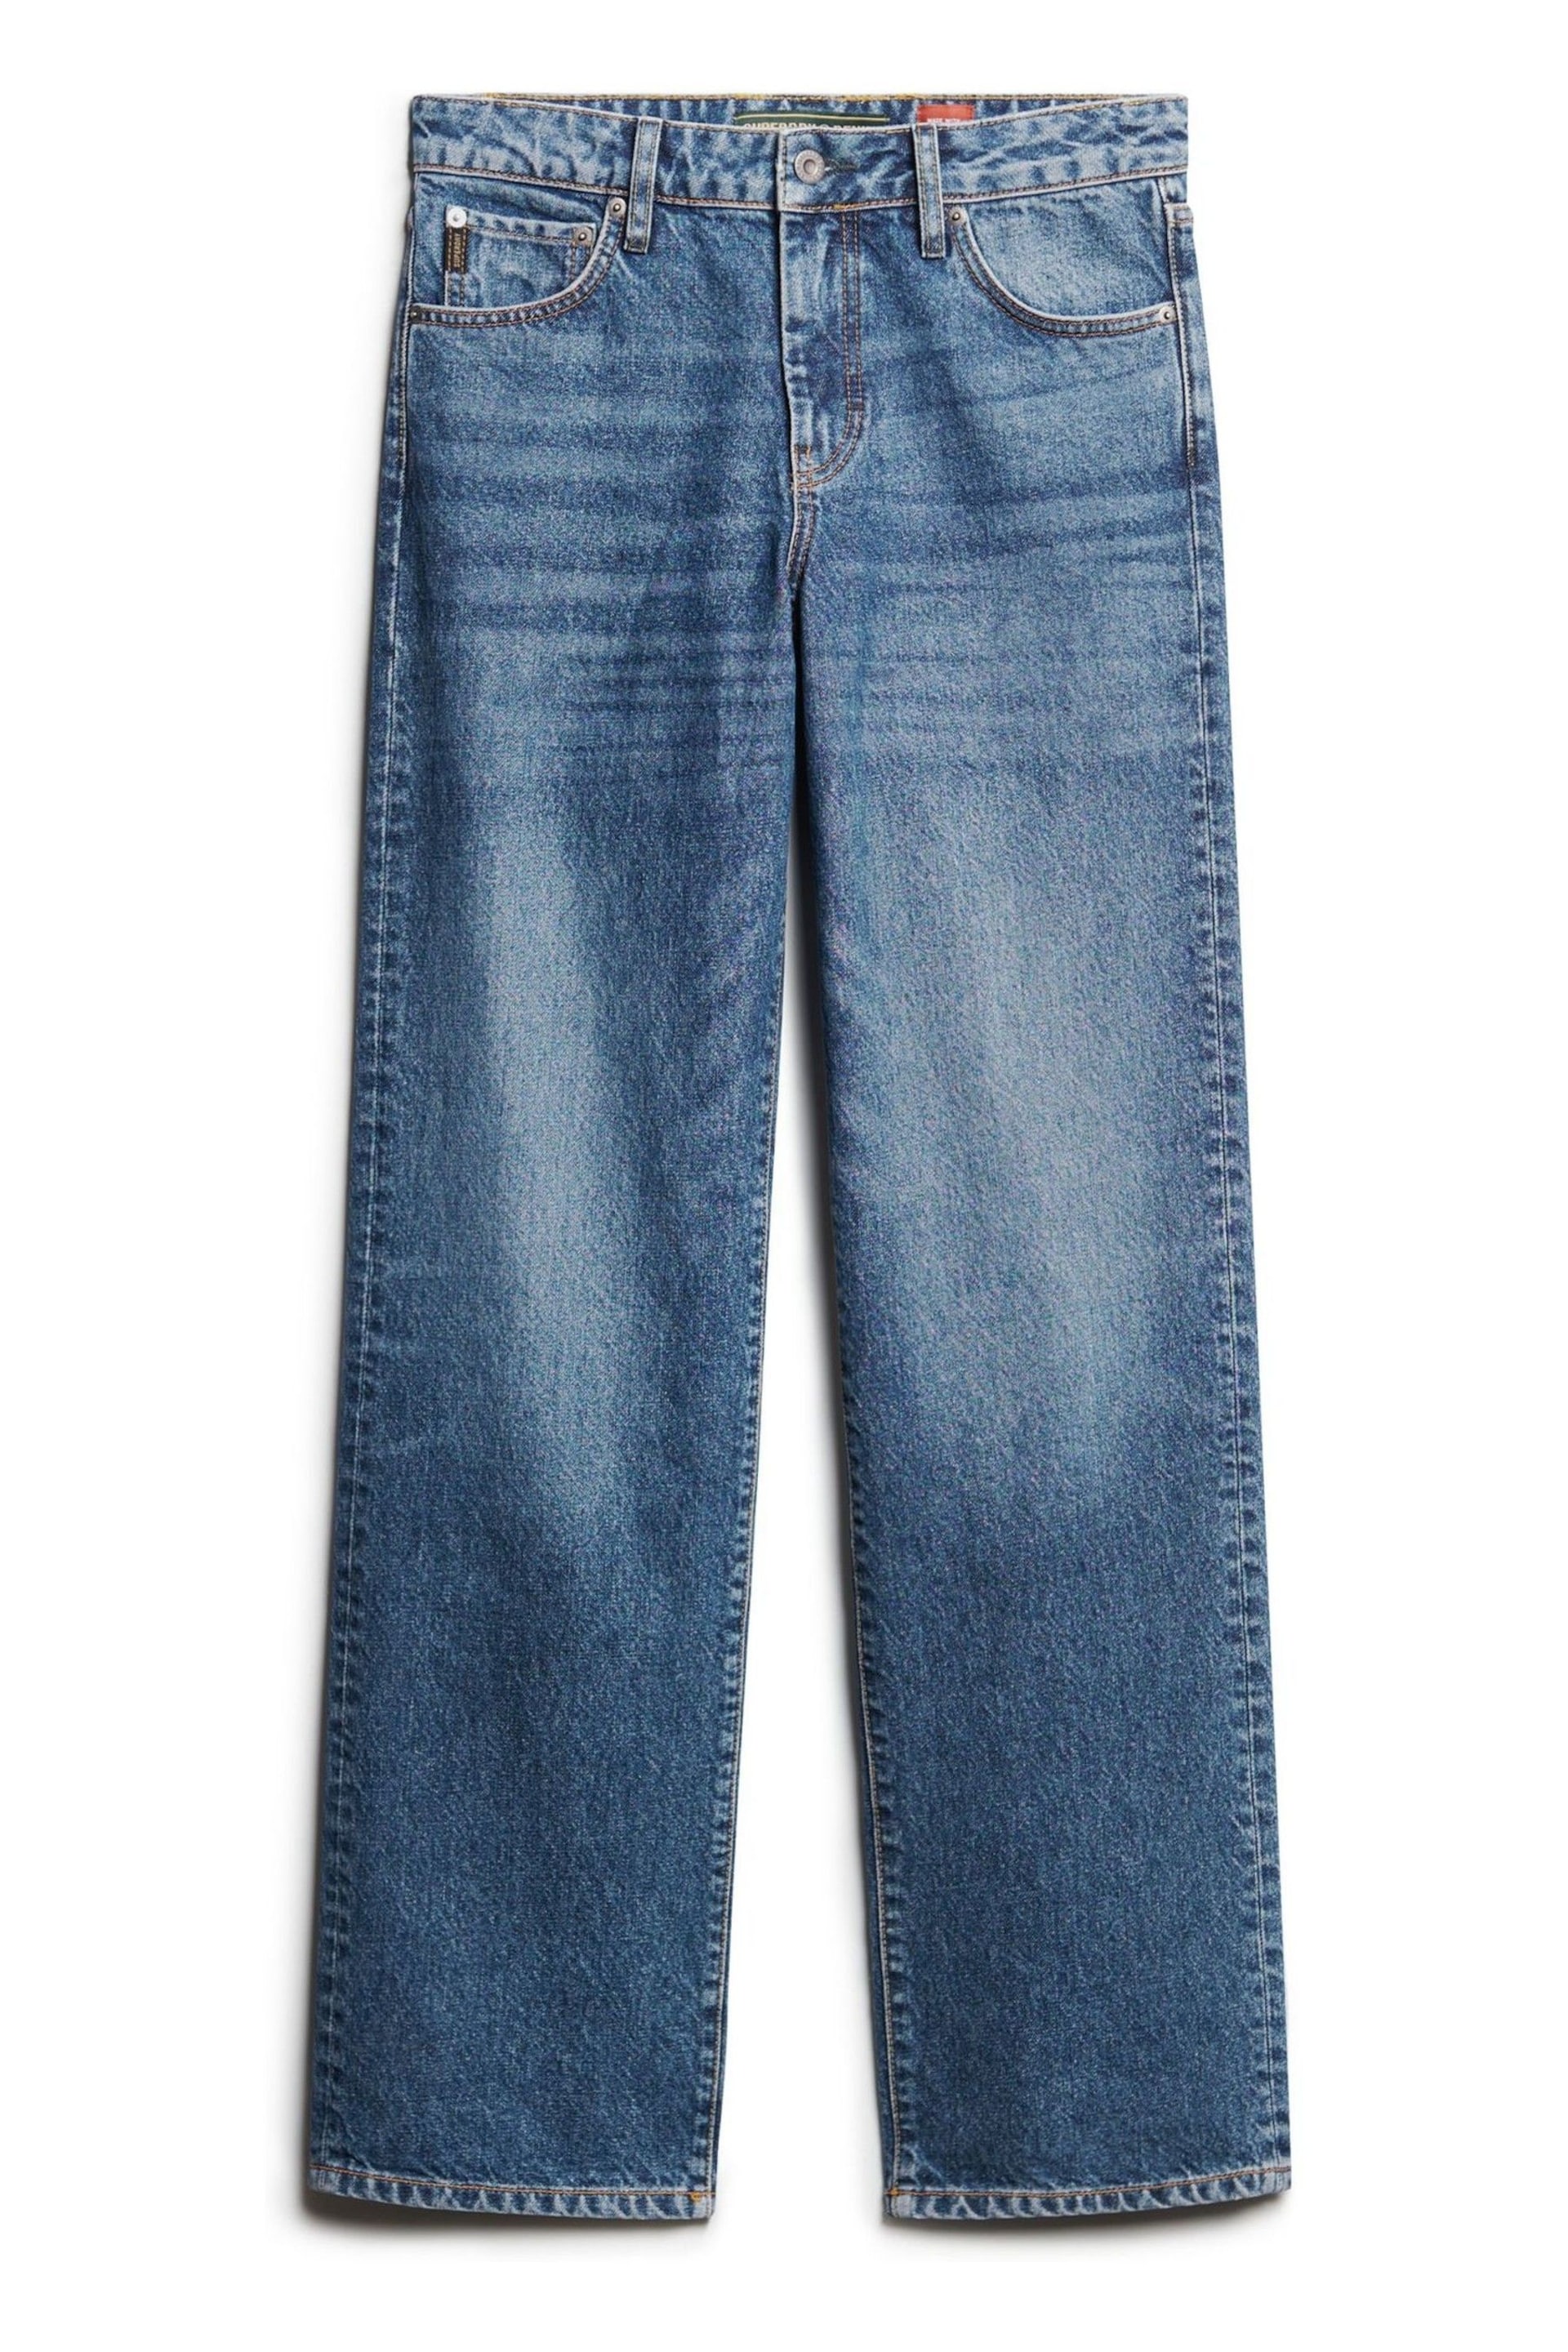 Superdry Blue Mid Rise Wide Leg Jeans - Image 5 of 7